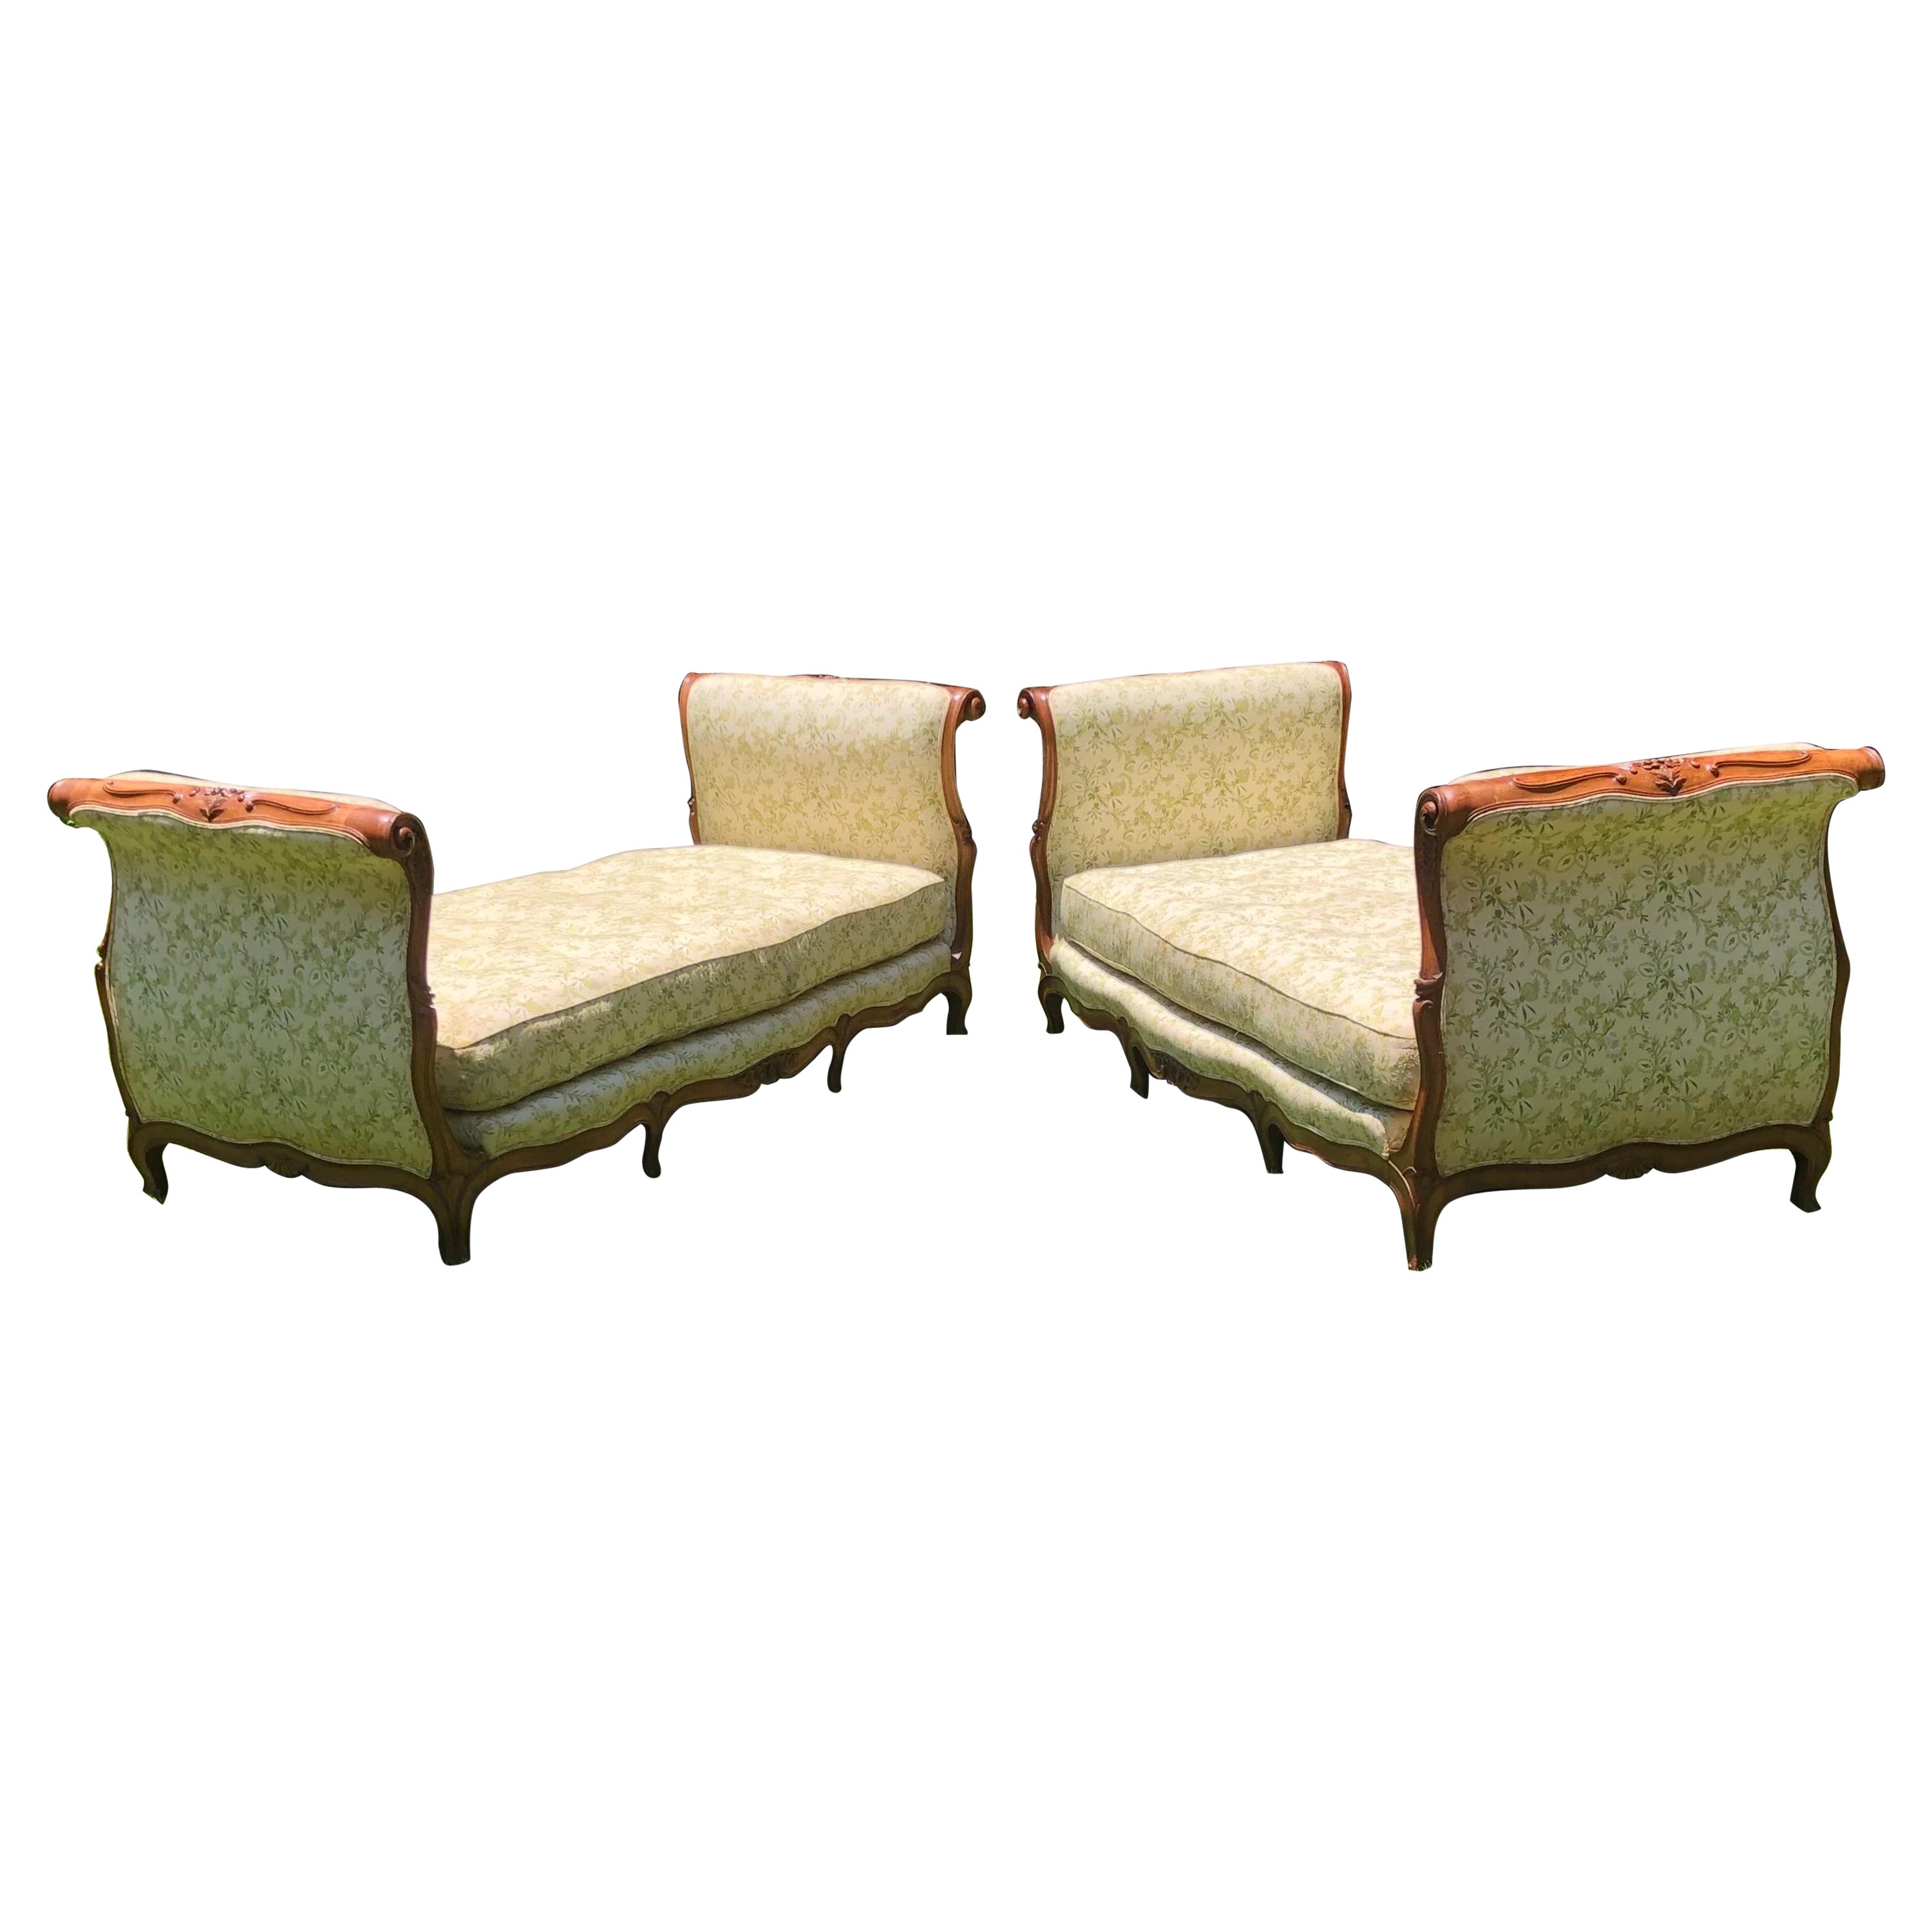  Pair French Eight Leg Louis XV Style  Day Beds ~ Sofas, 19th Century For Sale